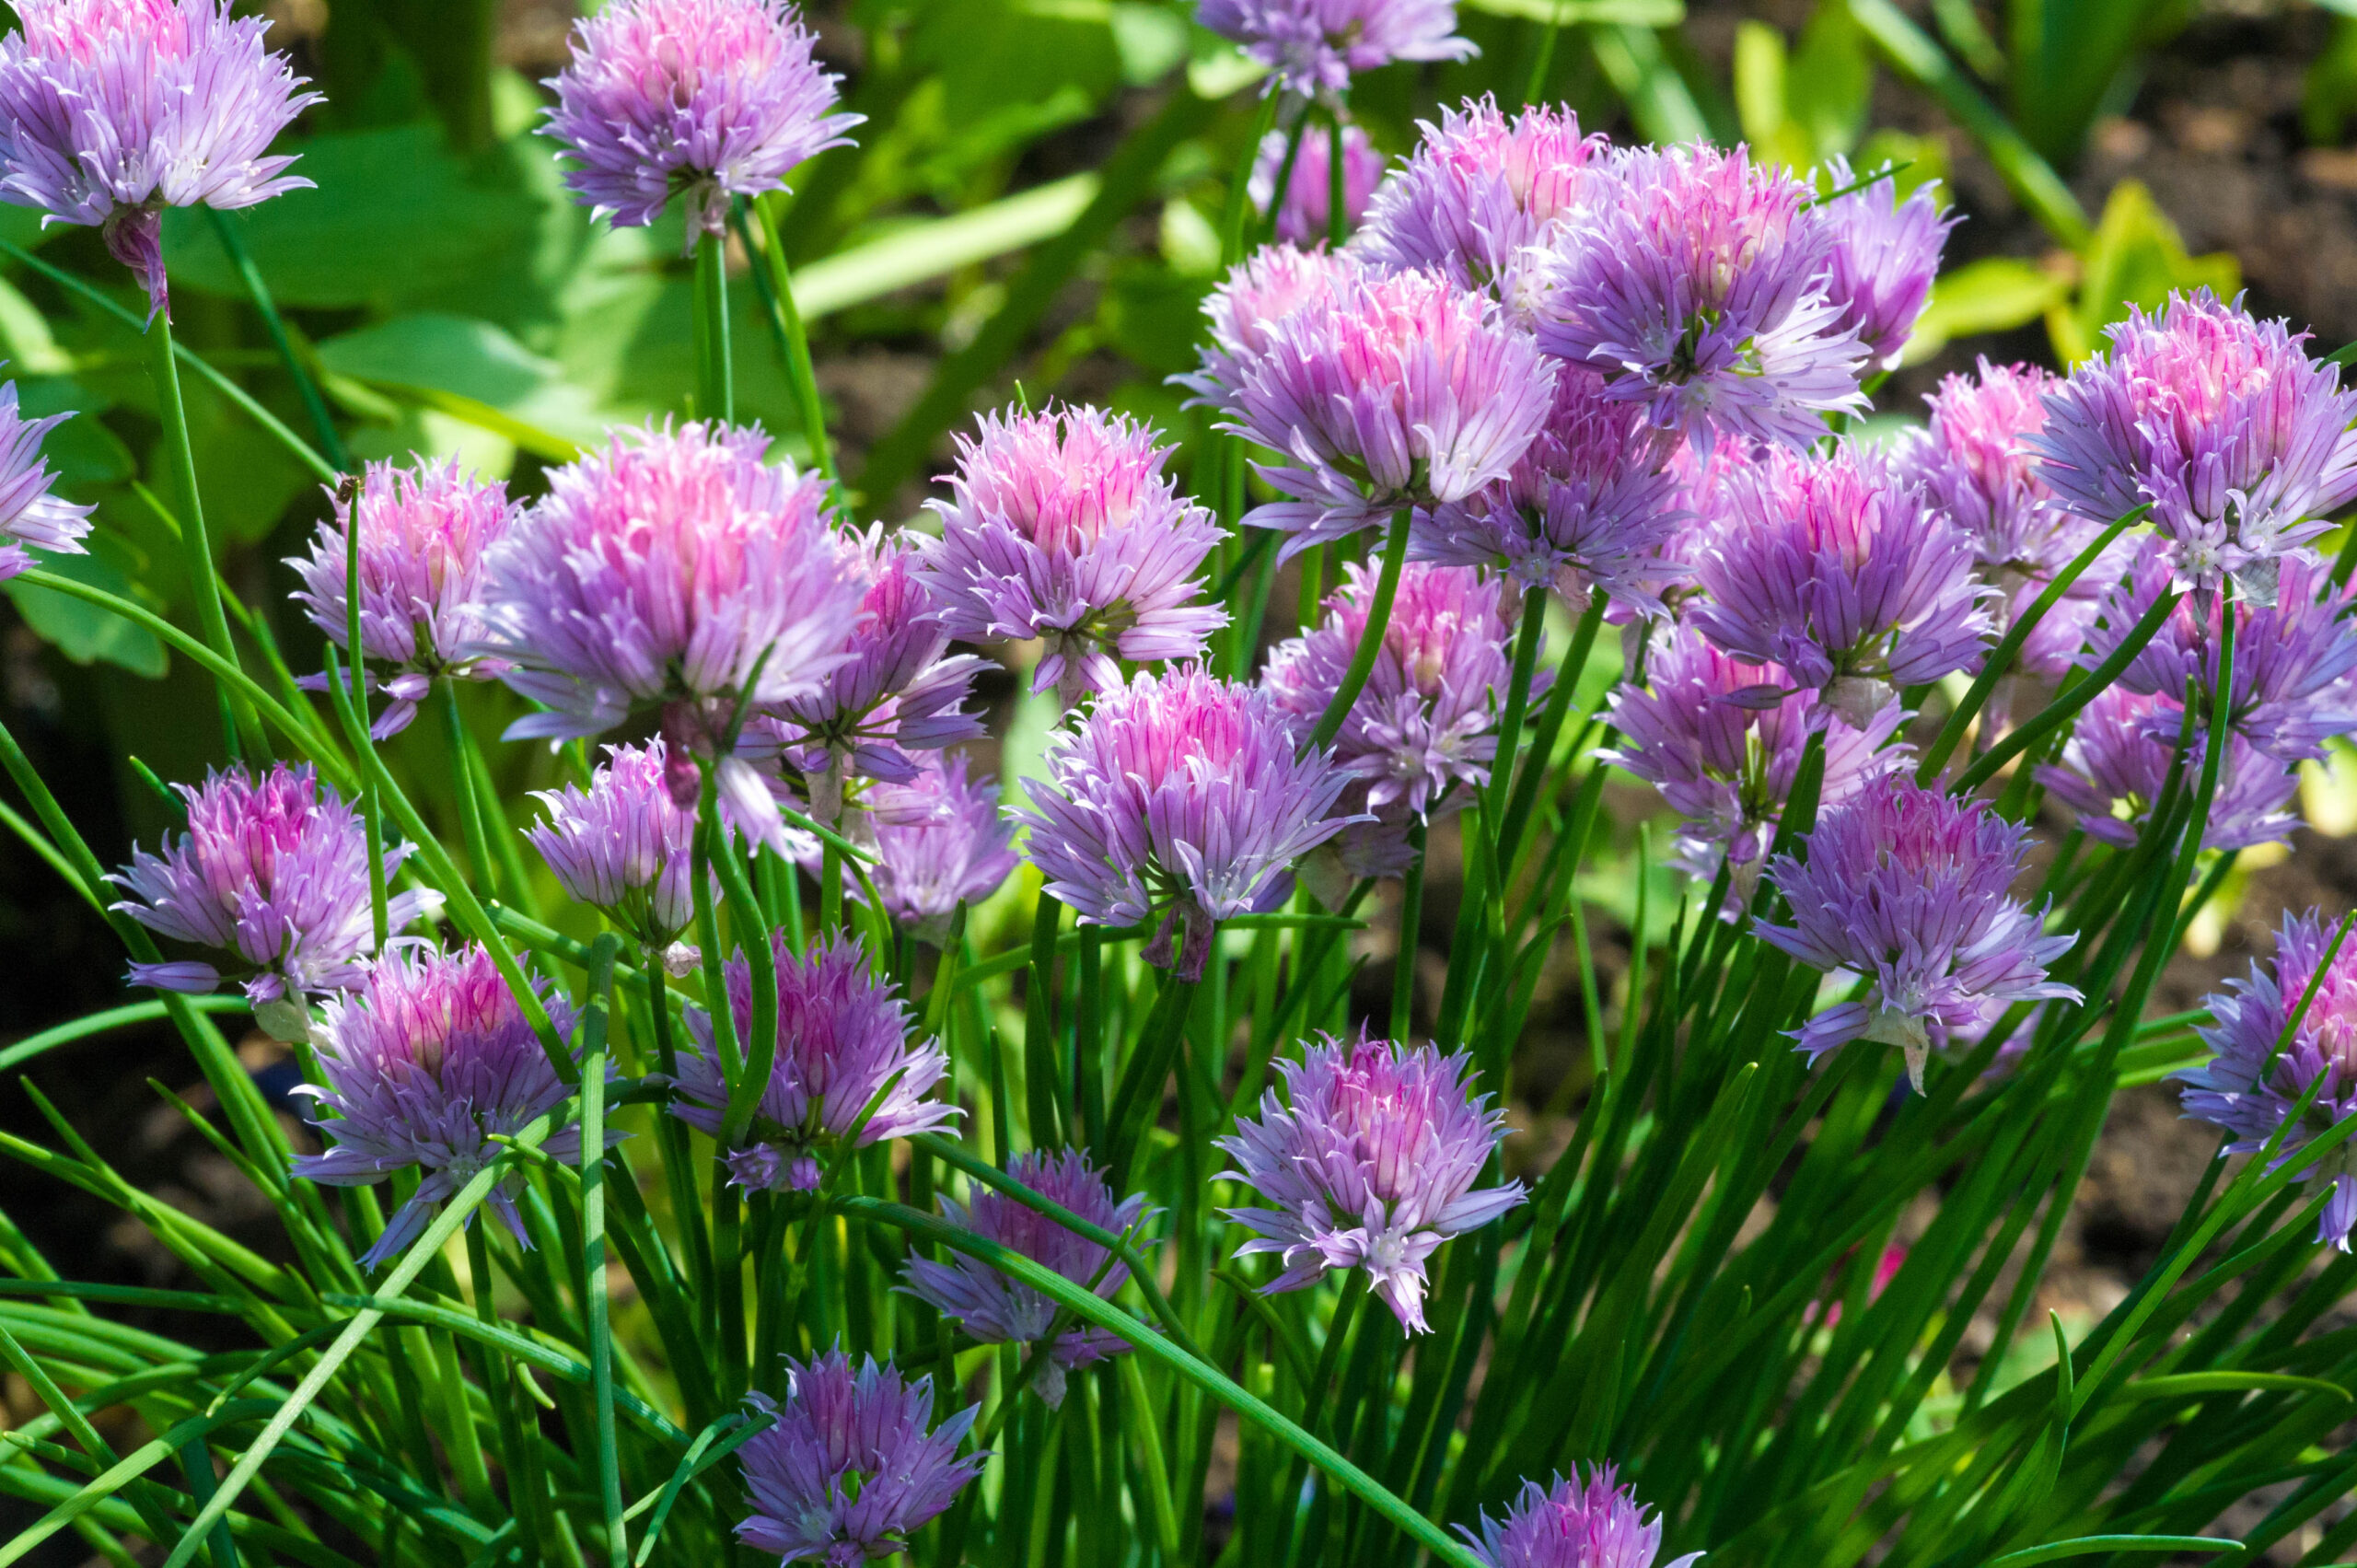 Chives, scientific name Allium schoenoprasum, A perennial plant, it is widespread in nature across much of Europe, Asia, and North America. The plant provides a great deal of nectar for pollinators.